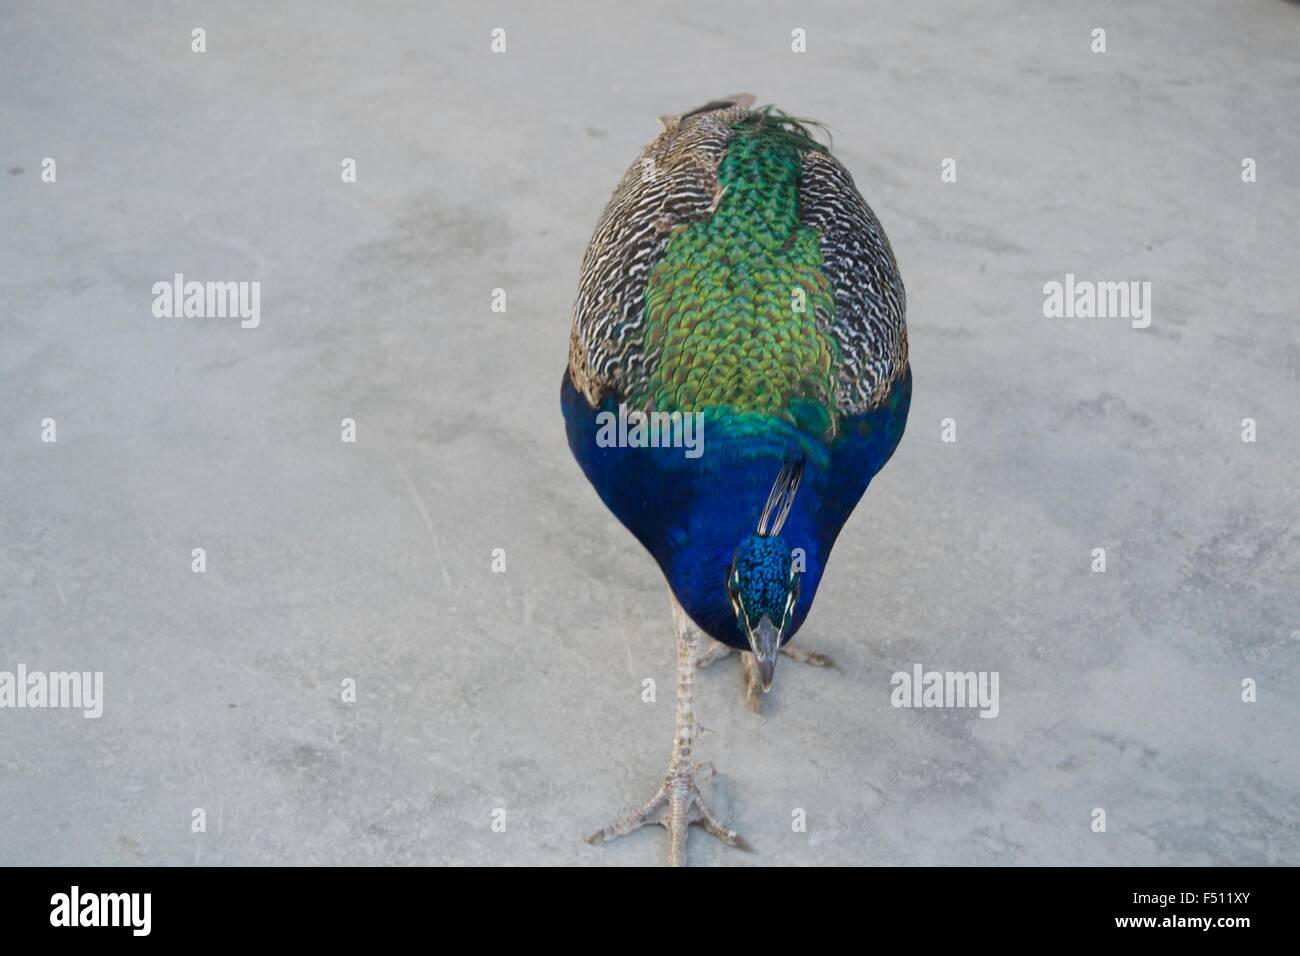 Colorful peacock feathers bird plumage blue green Stock Photo